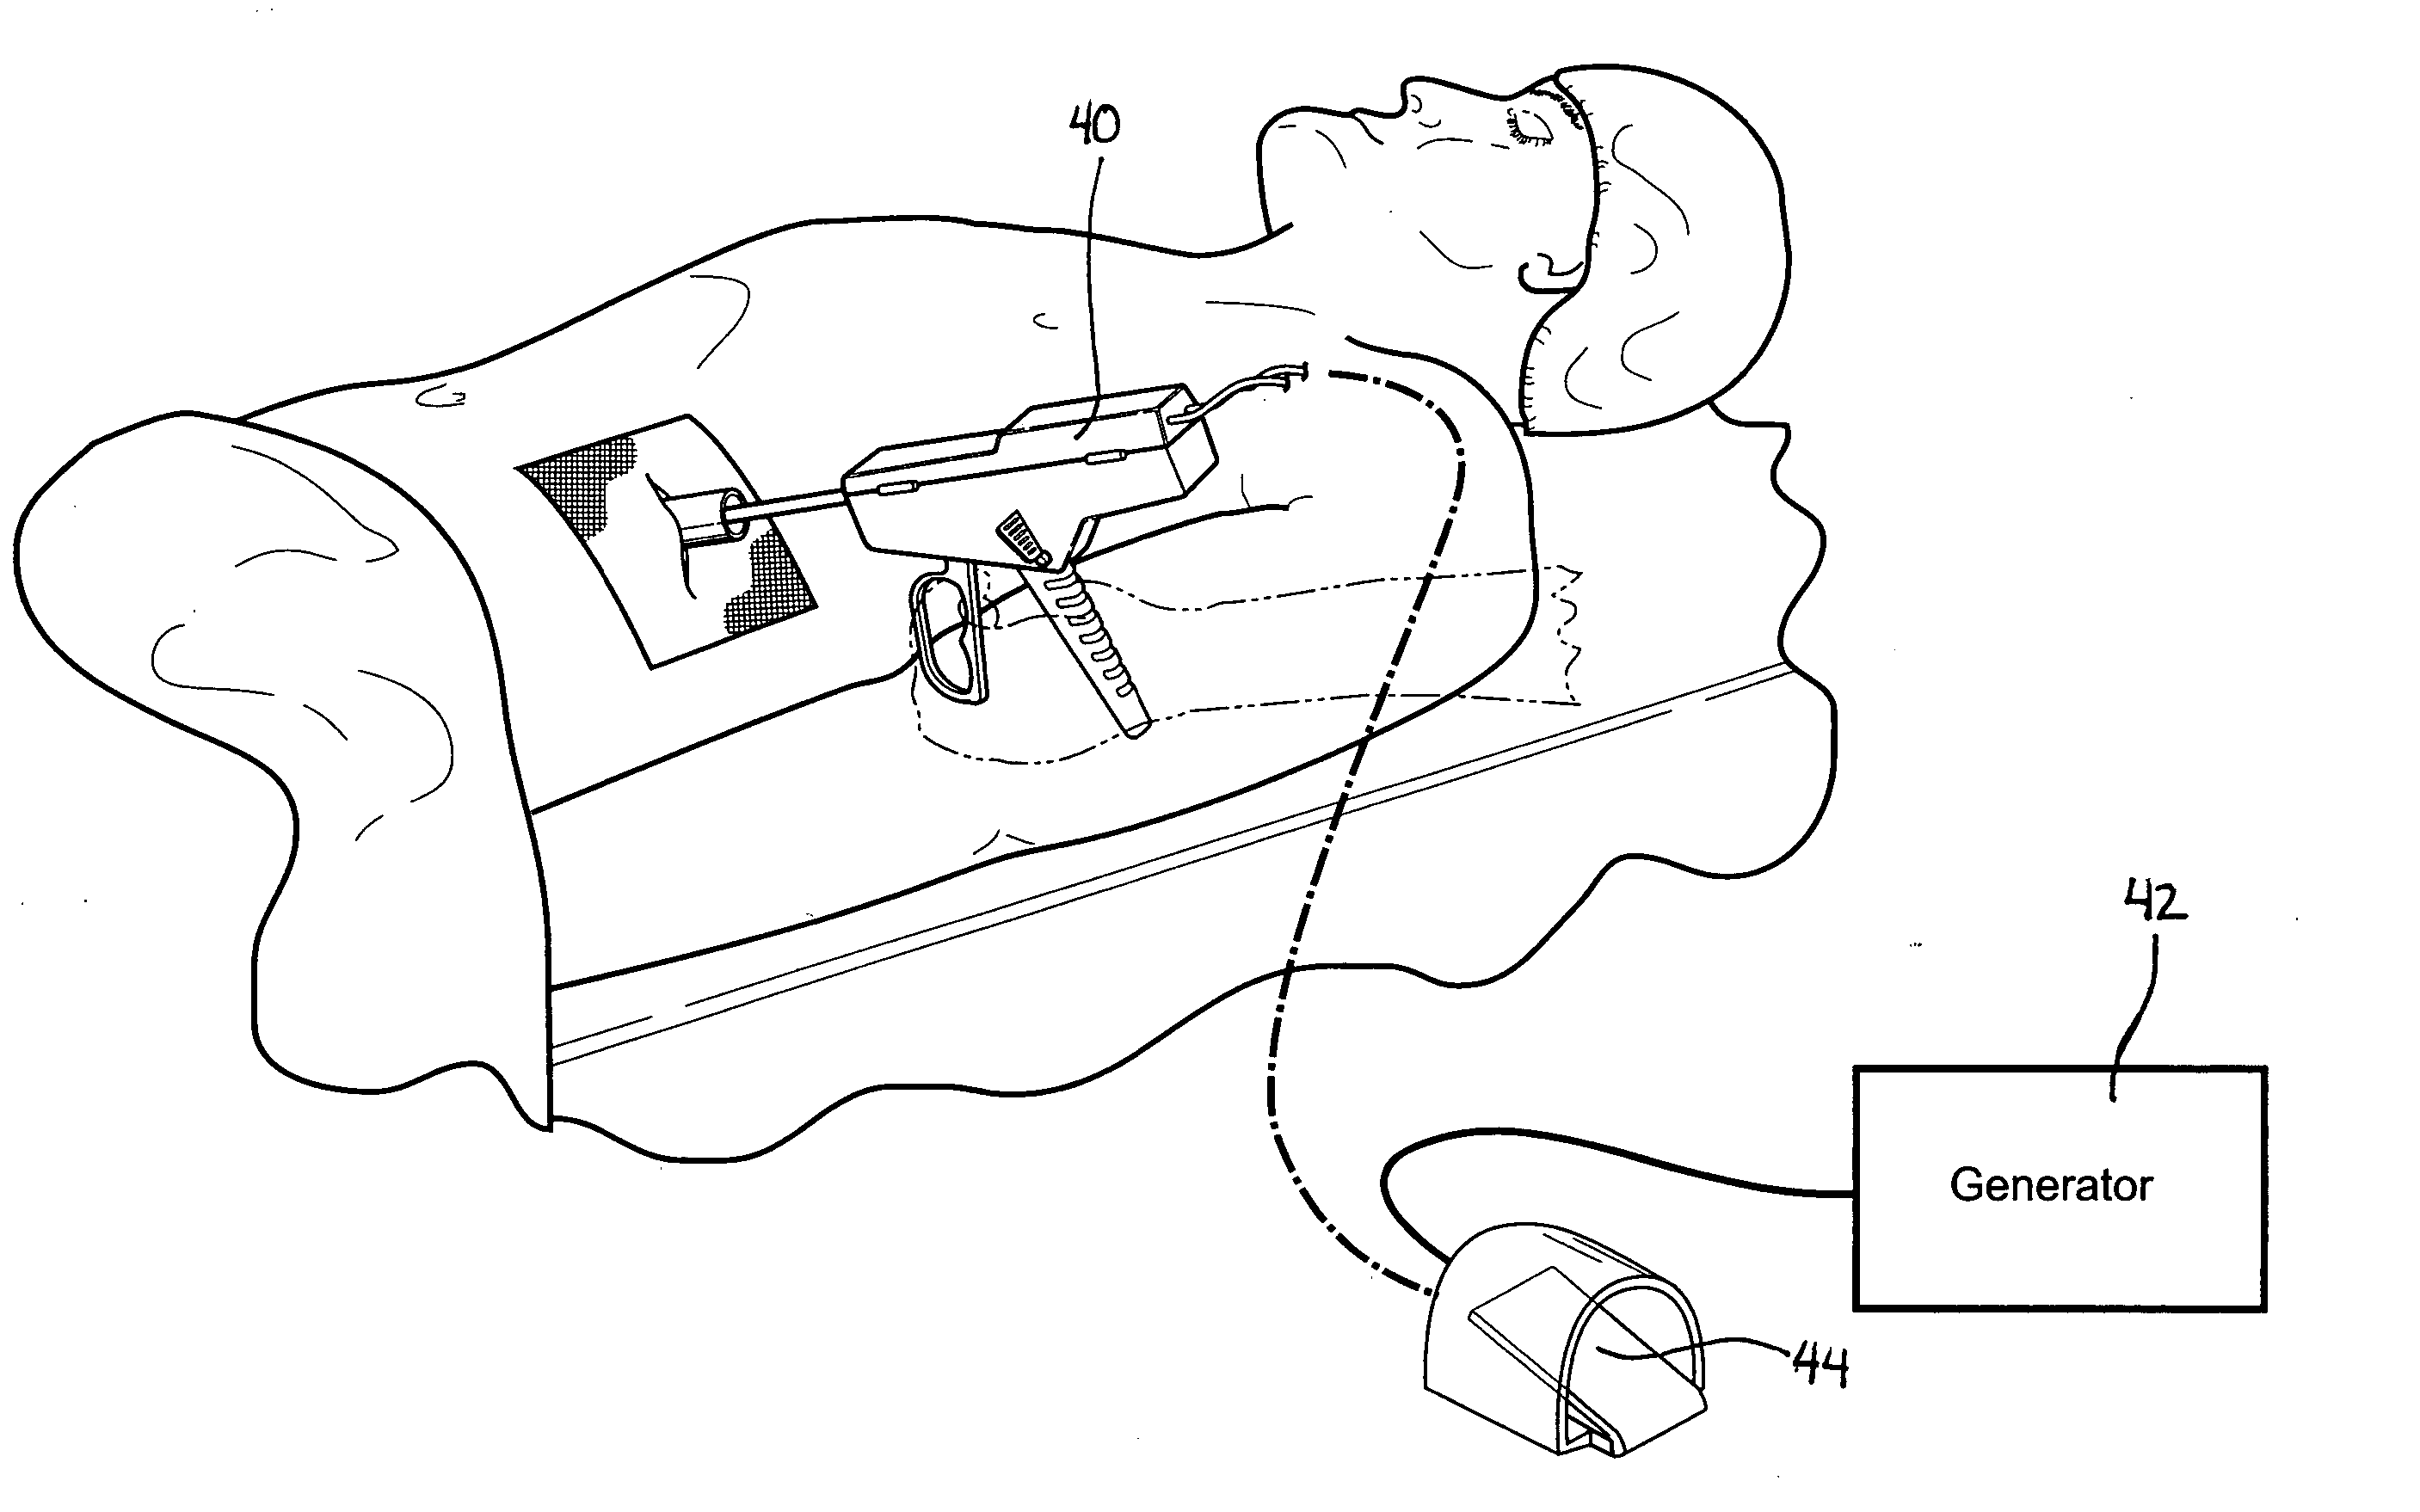 Multi-mode surgical instrument